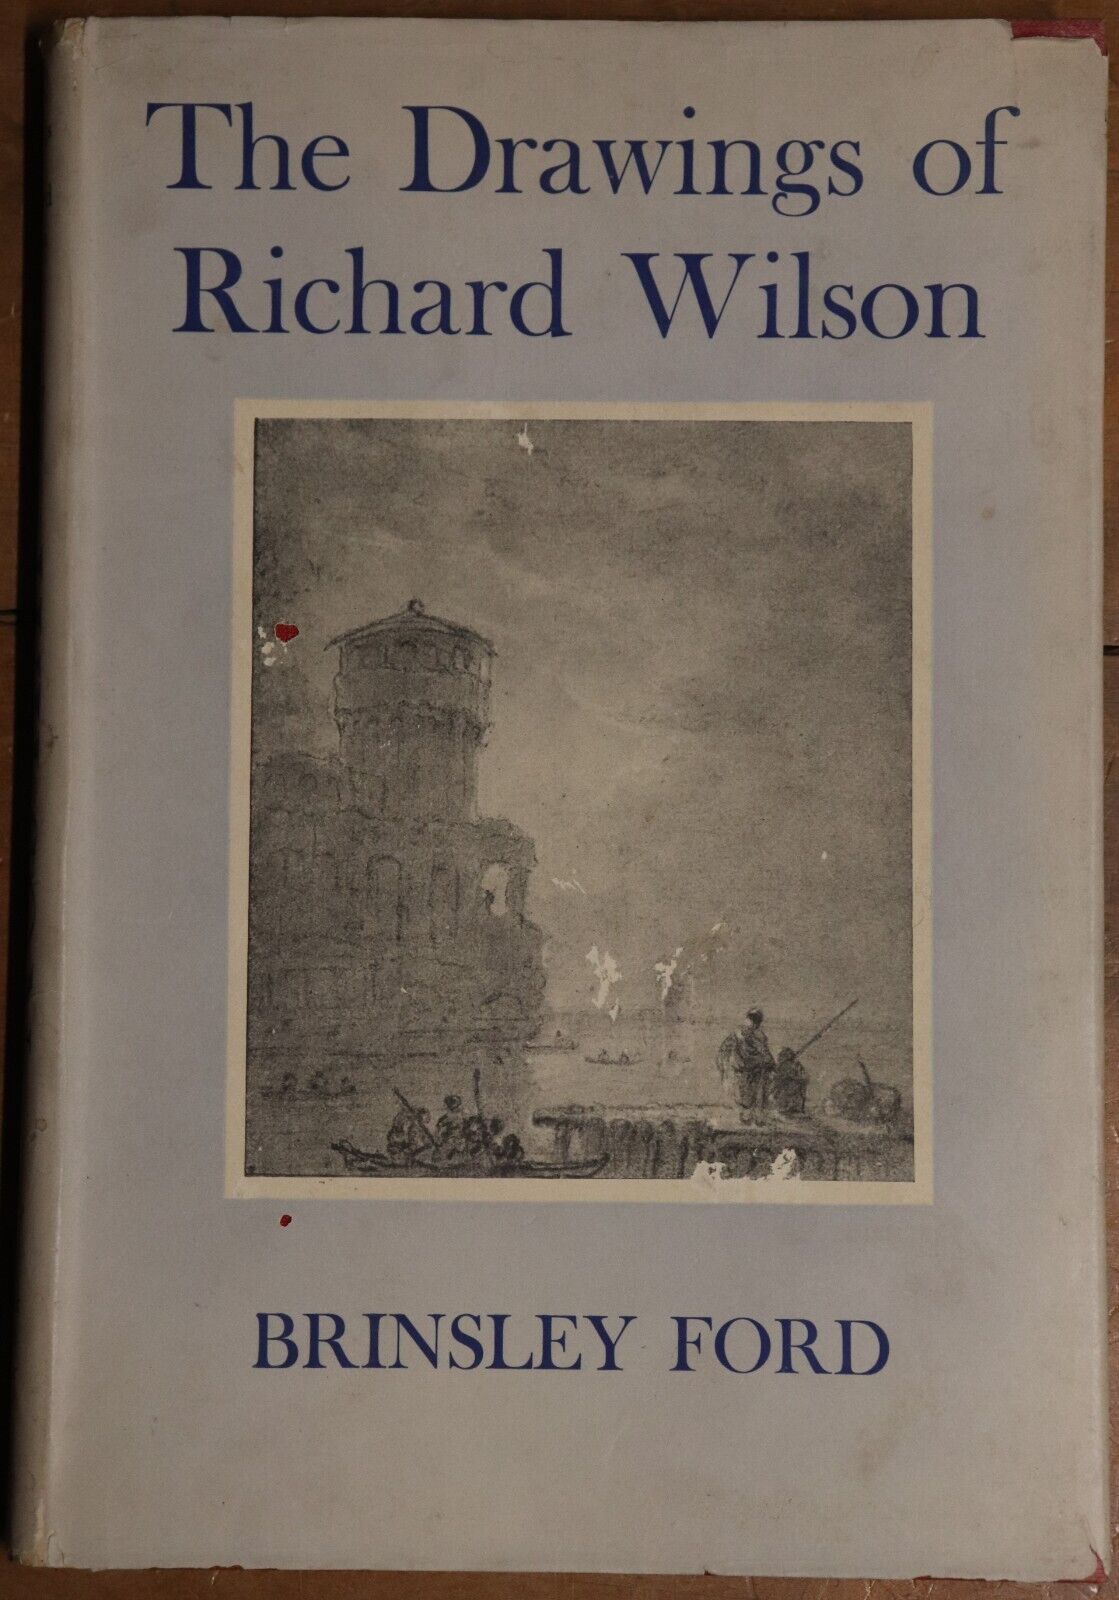 The Drawings Of Richard Wilson - 1951 - 1st Edition - Vintage Art Book